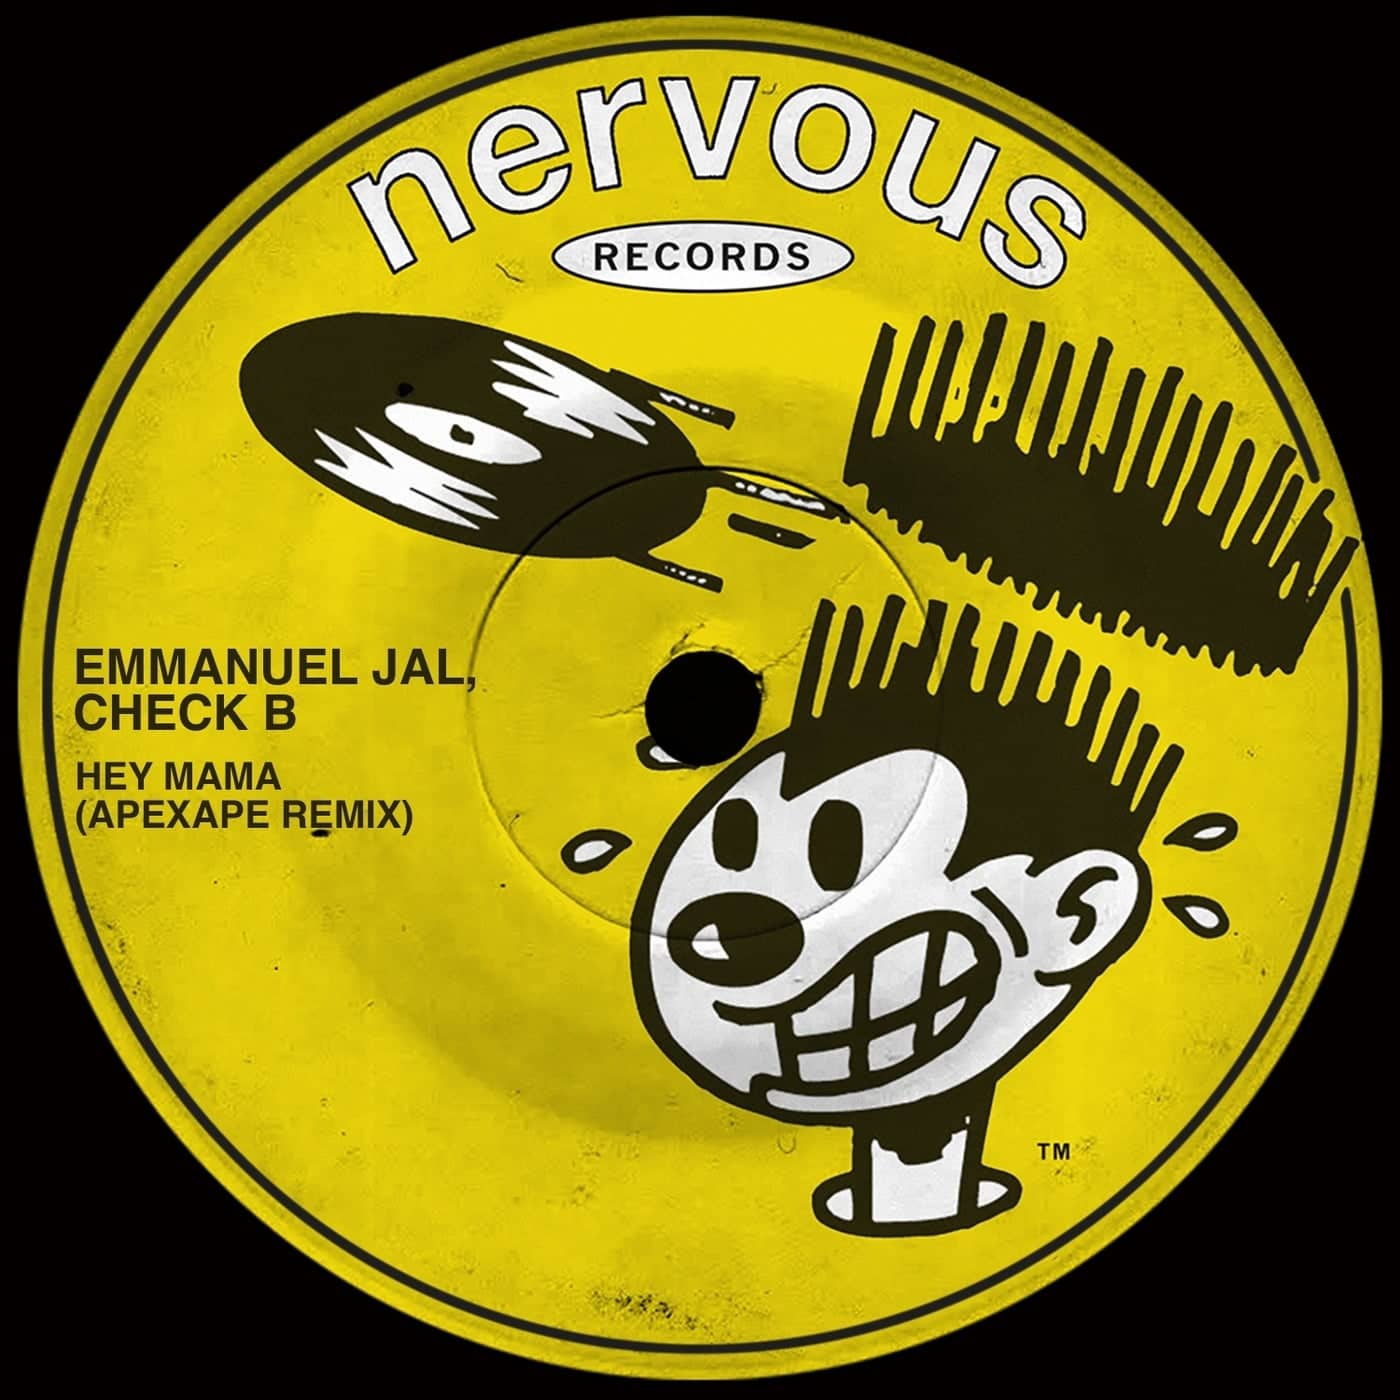 image cover: Hey Mama (APEXAPE Remix) by Emmanuel Jal, Check B on Nervous Records